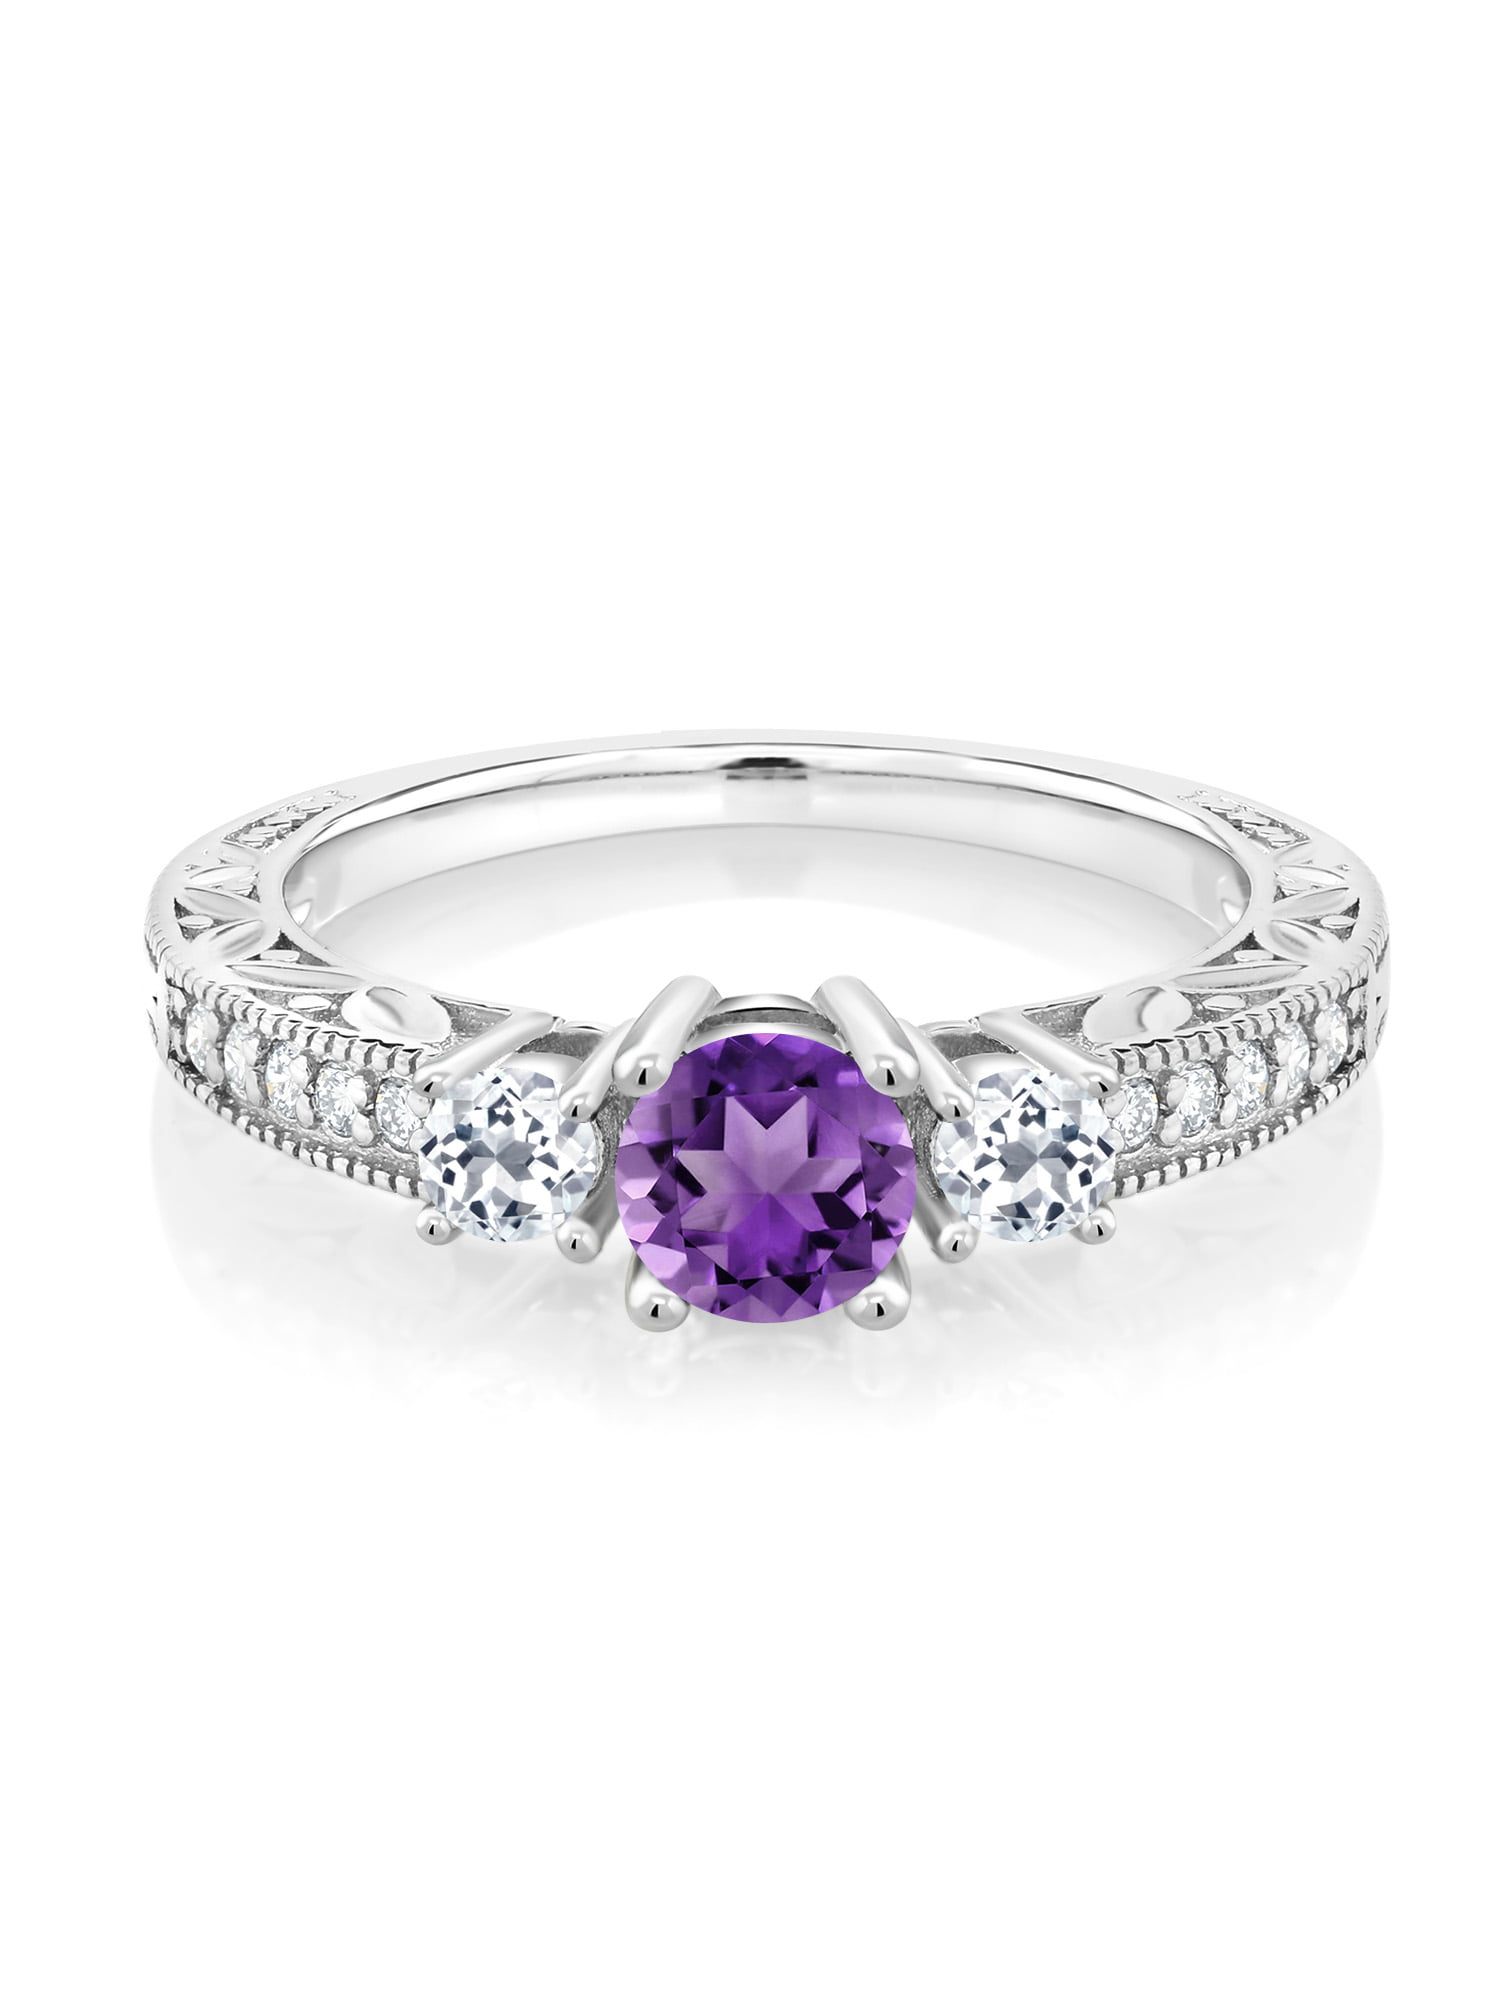 9 8 Natural 2ct Purple Amethyst 925 Sterling Silver Engagement Ring Size 6 